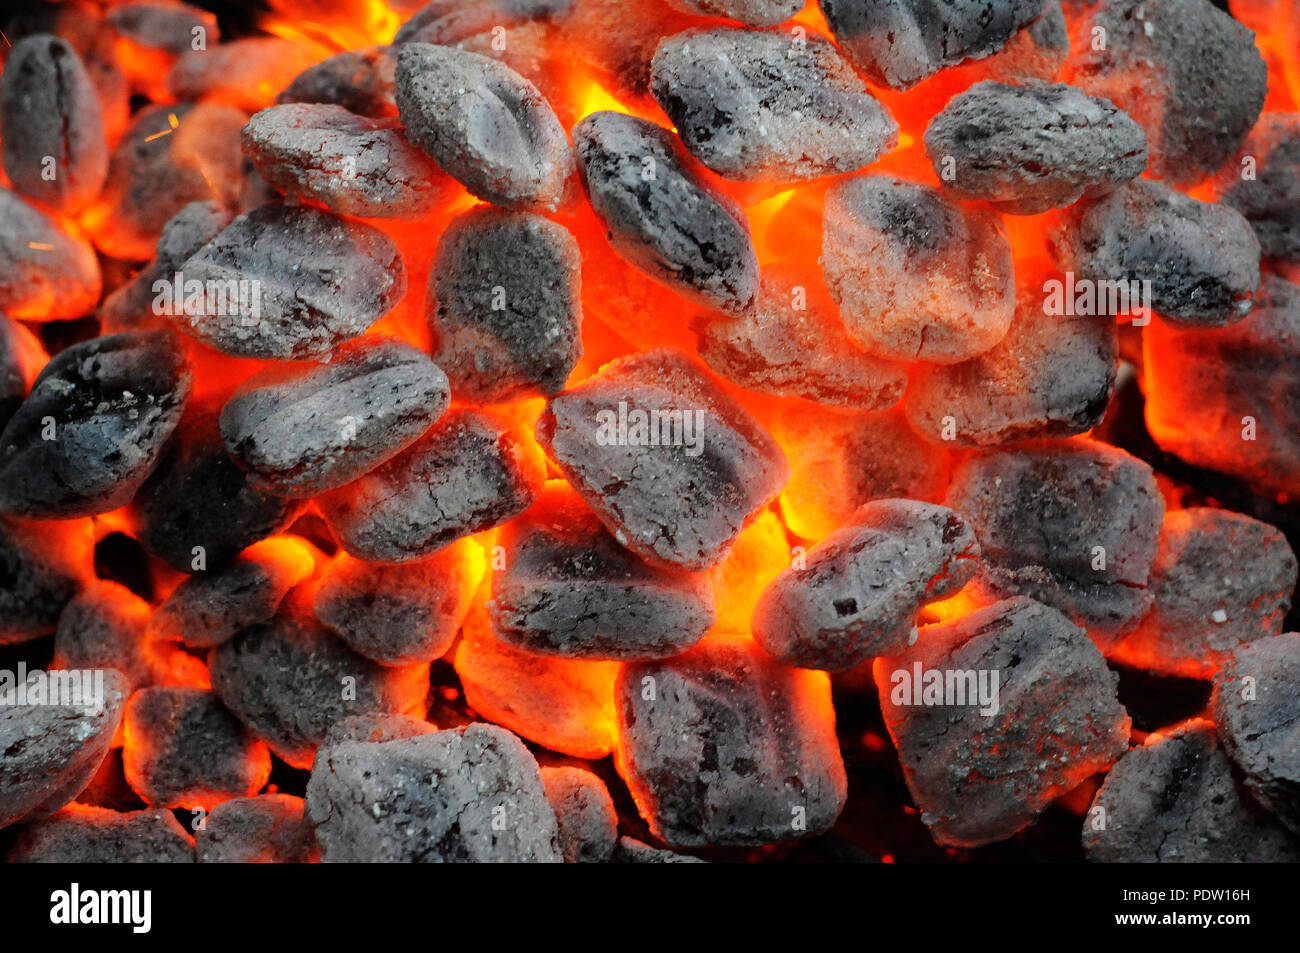 A burning charcoal fire Stock Photo